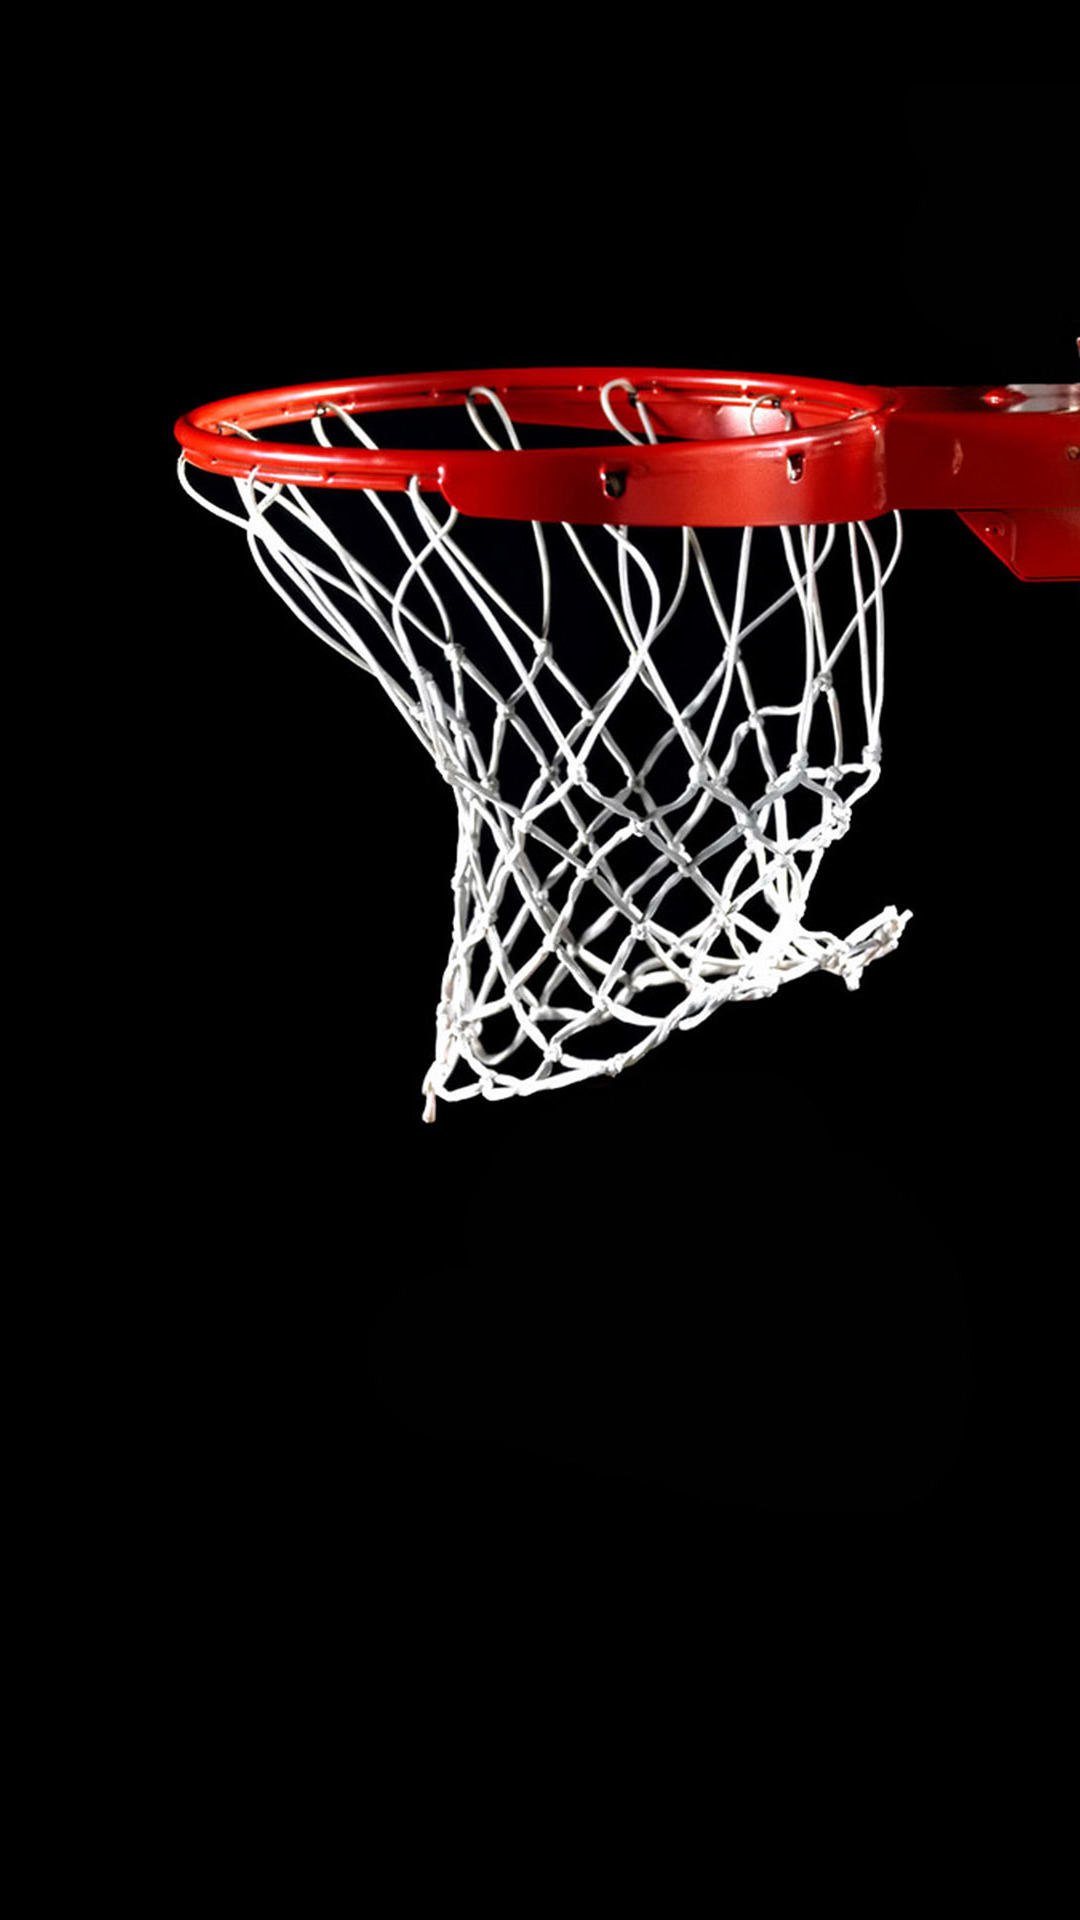 Space Basketball IPhone Wallpaper HD  IPhone Wallpapers  iPhone Wallpapers